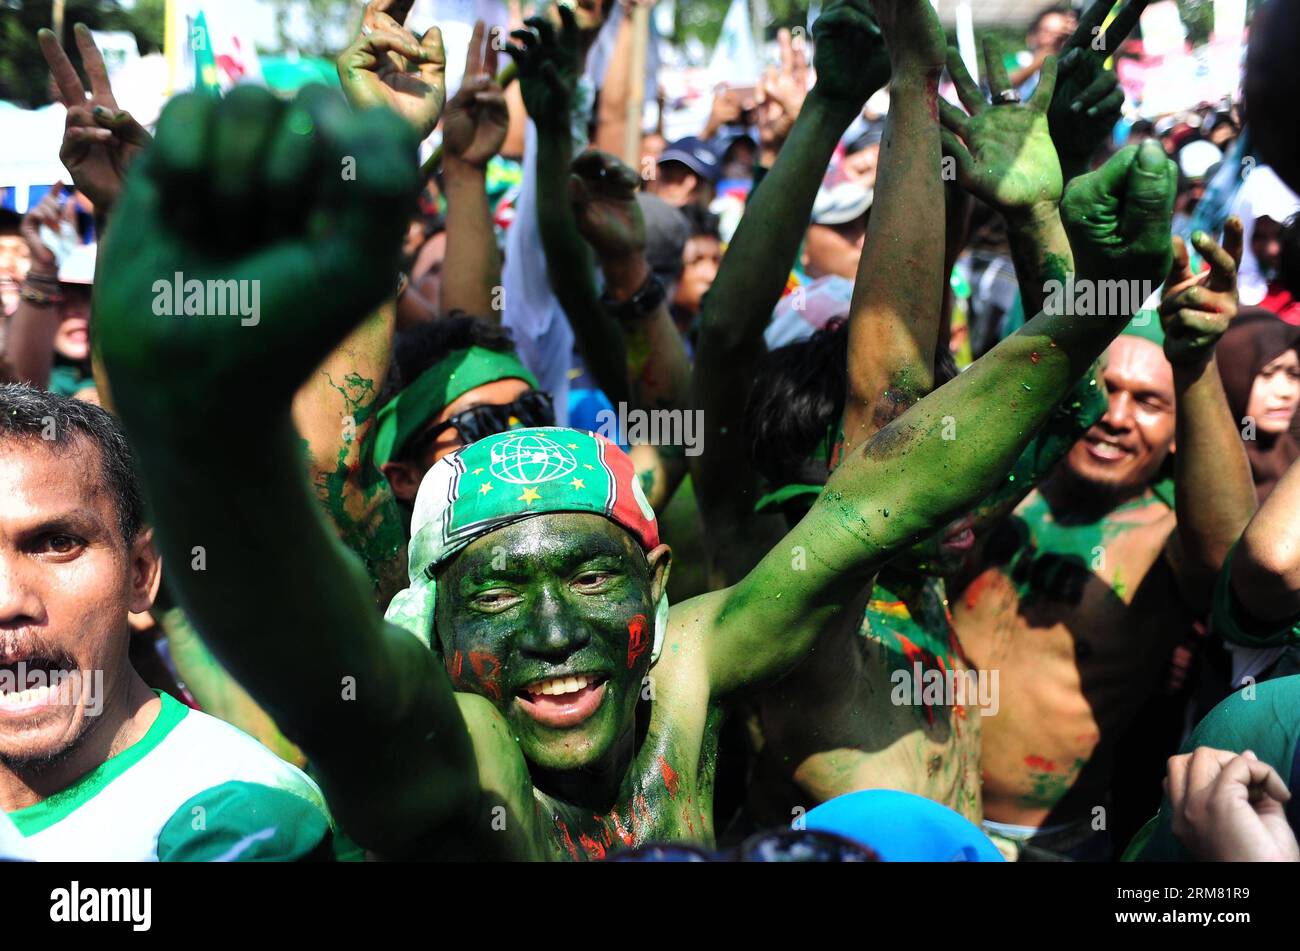 (140324) -- JAKARTA, March 24, 2014 (Xinhua) -- Supporters of Nation Awakening Party (PKB) take part in a campaign rally in Jakarta, Indonesia, March 24, 2014. Indonesia is to hold direct legislative elections on April 9 and direct presidential polls on July 9. (Xinhua/Zulkarnain) INDONESIA-JAKARTA-ELECTION CAMPAIGN PUBLICATIONxNOTxINxCHN   Jakarta March 24 2014 XINHUA Supporters of Nation Awakening Party PKB Take Part in a Campaign Rally in Jakarta Indonesia March 24 2014 Indonesia IS to Hold Direct Legislature Elections ON April 9 and Direct Presidential Polls ON July 9 XINHUA  Indonesia Jak Stock Photo